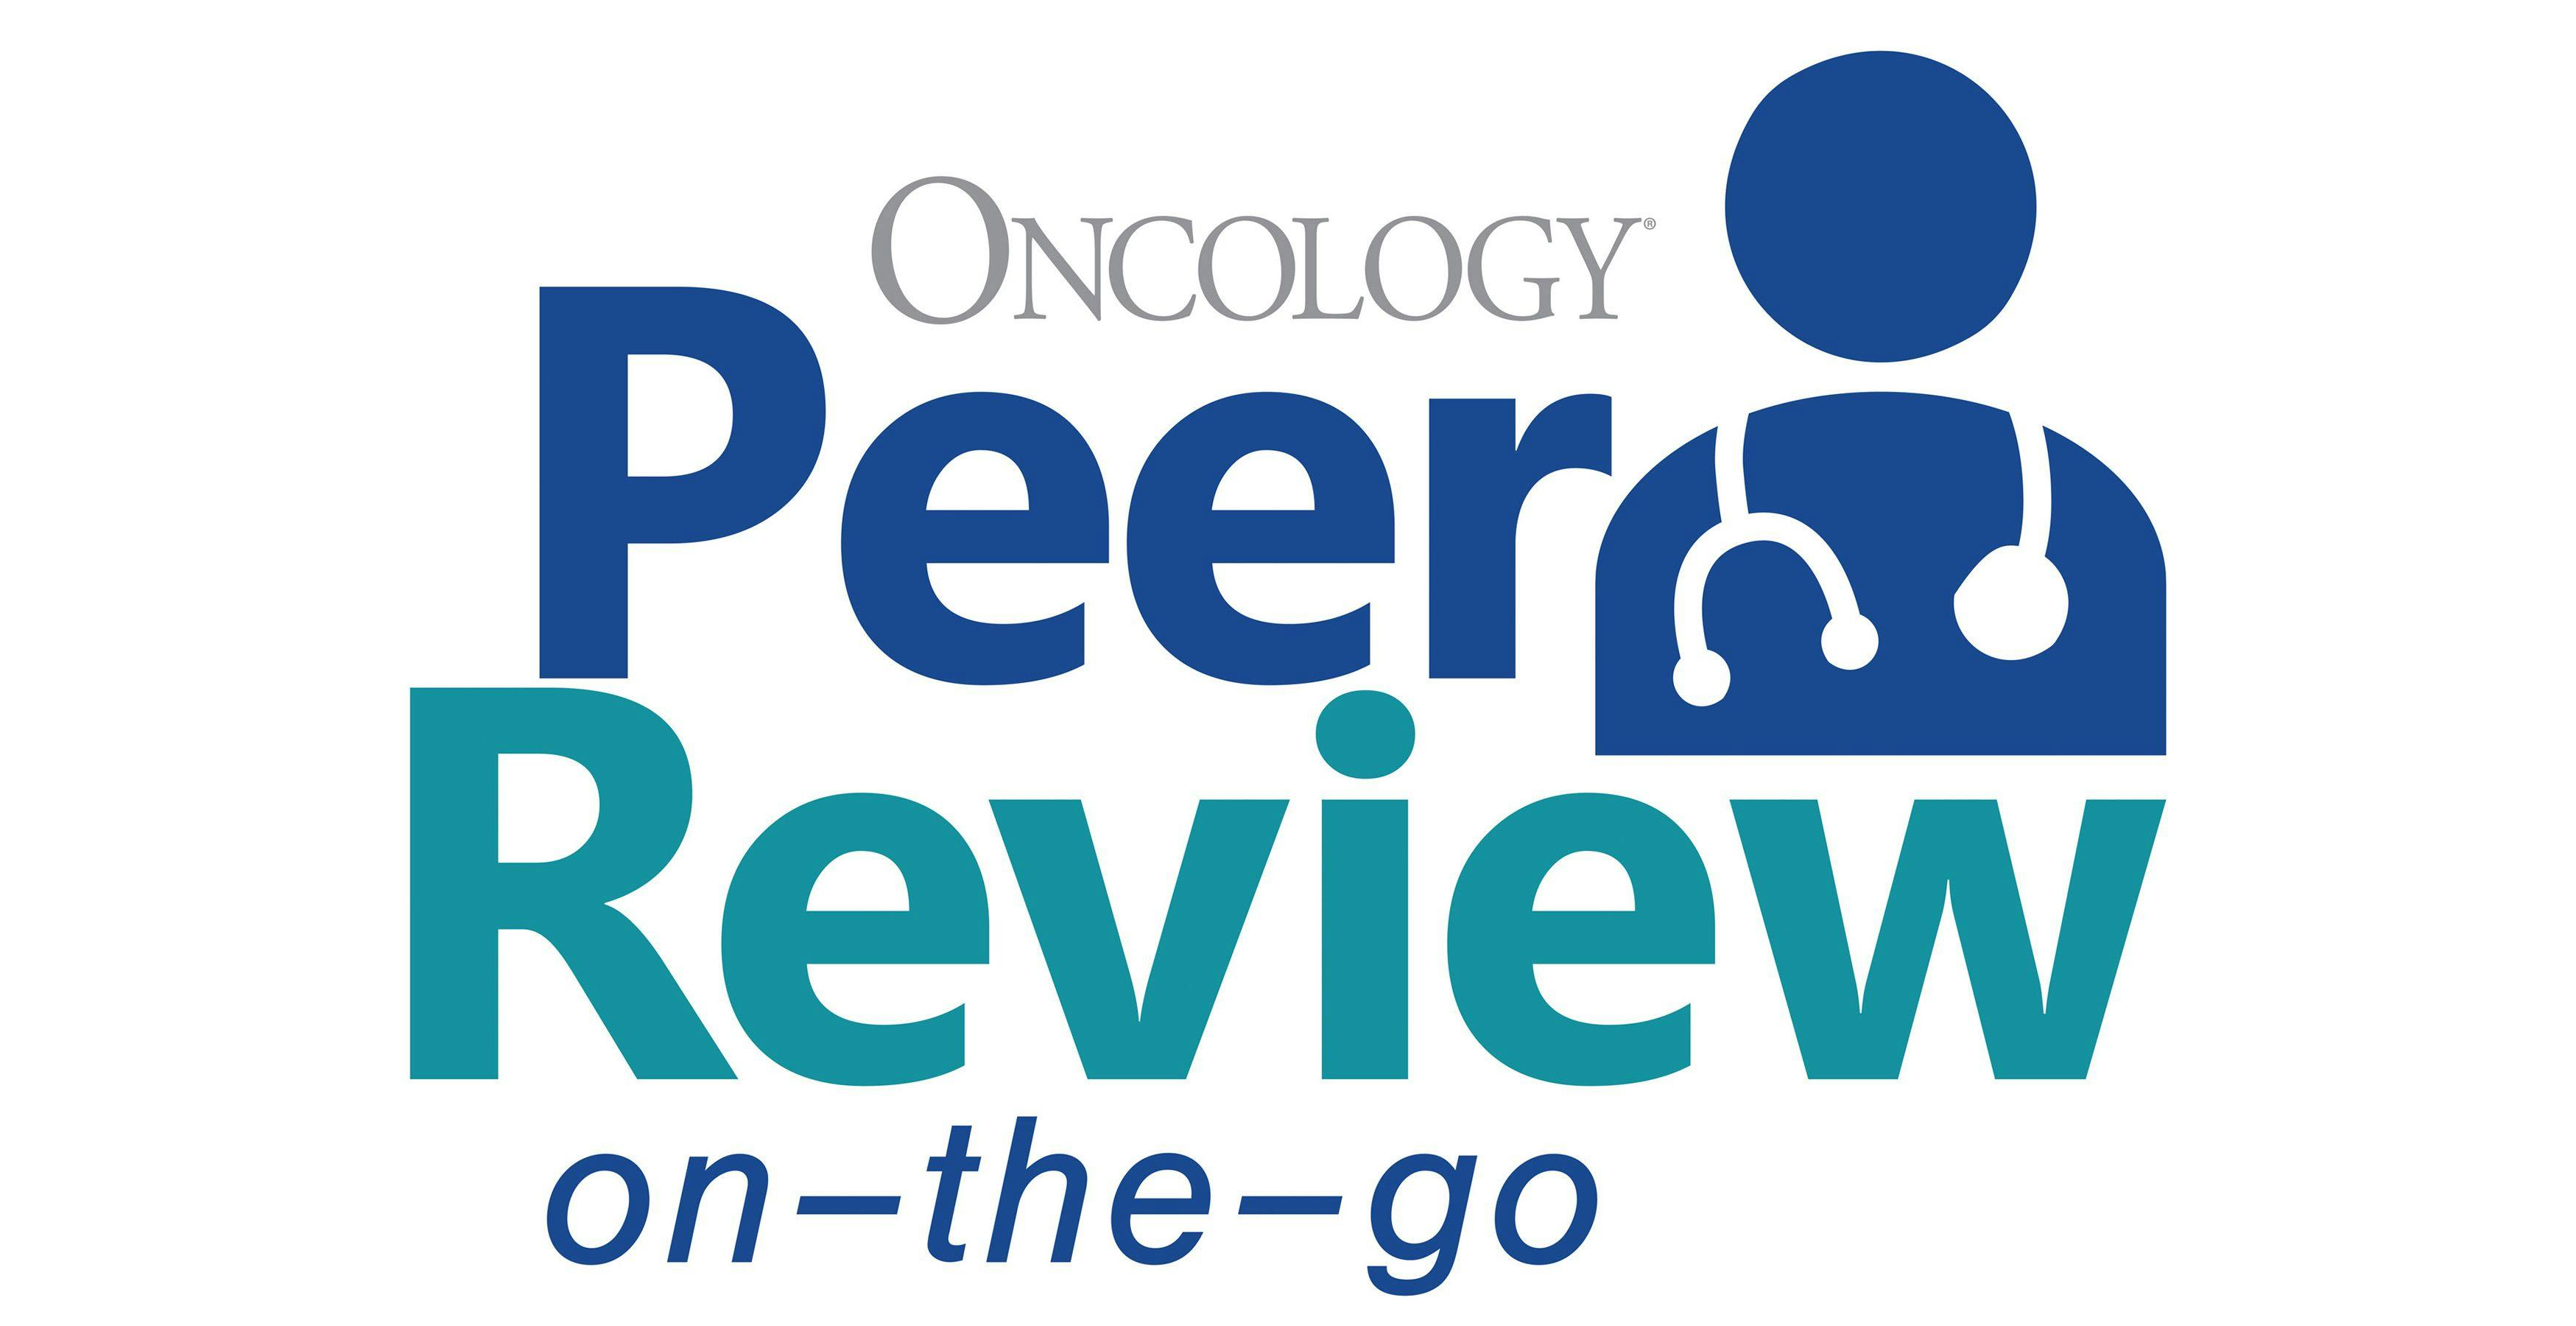 The latest podcast episode of Oncology Peer Review On-The-Go features a conversation with Tzvia Bader and Karine Perreault on TrialJectory’s platform, which seeks to guide patients with cancer on their treatment journey.